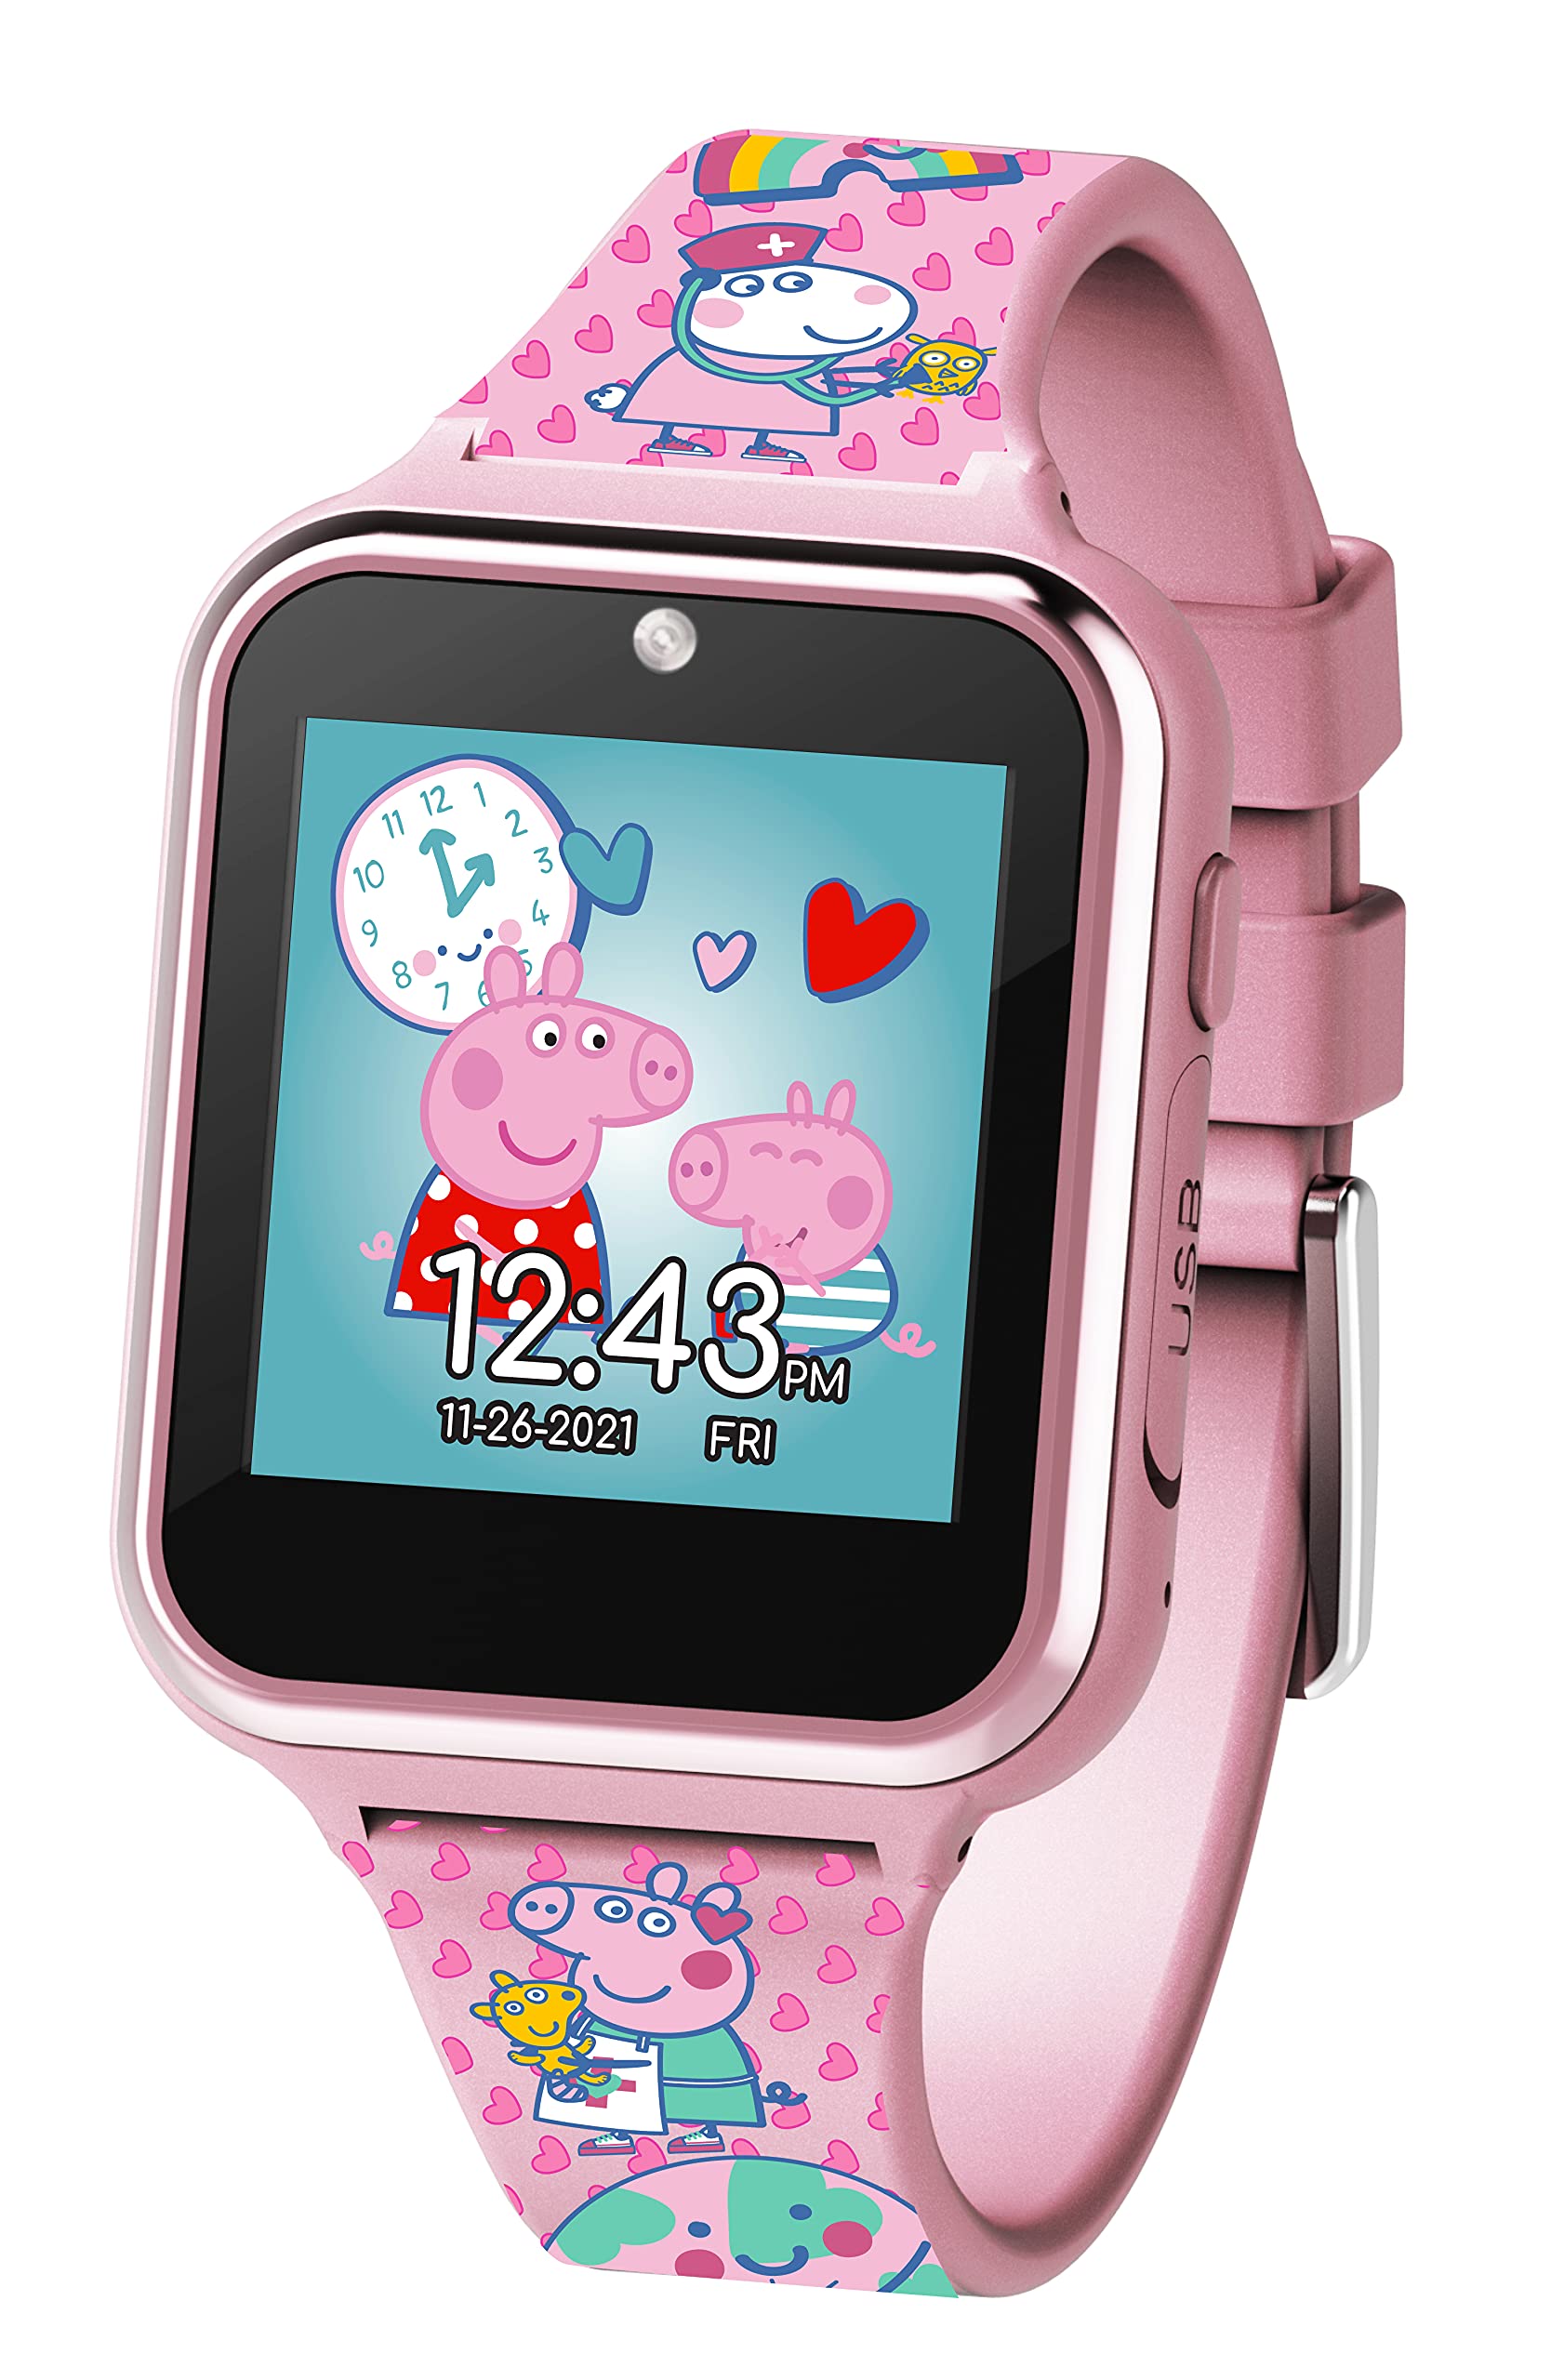 Accutime Kids Peppa Pig Baby Pink Educational Learning Smart Watch Toy with Multicolor Graphic Strap for Girls, Boys, Toddlers - Selfie Cam, Learning Games, Alarm, Calculator (Model: PPG4086AZ)